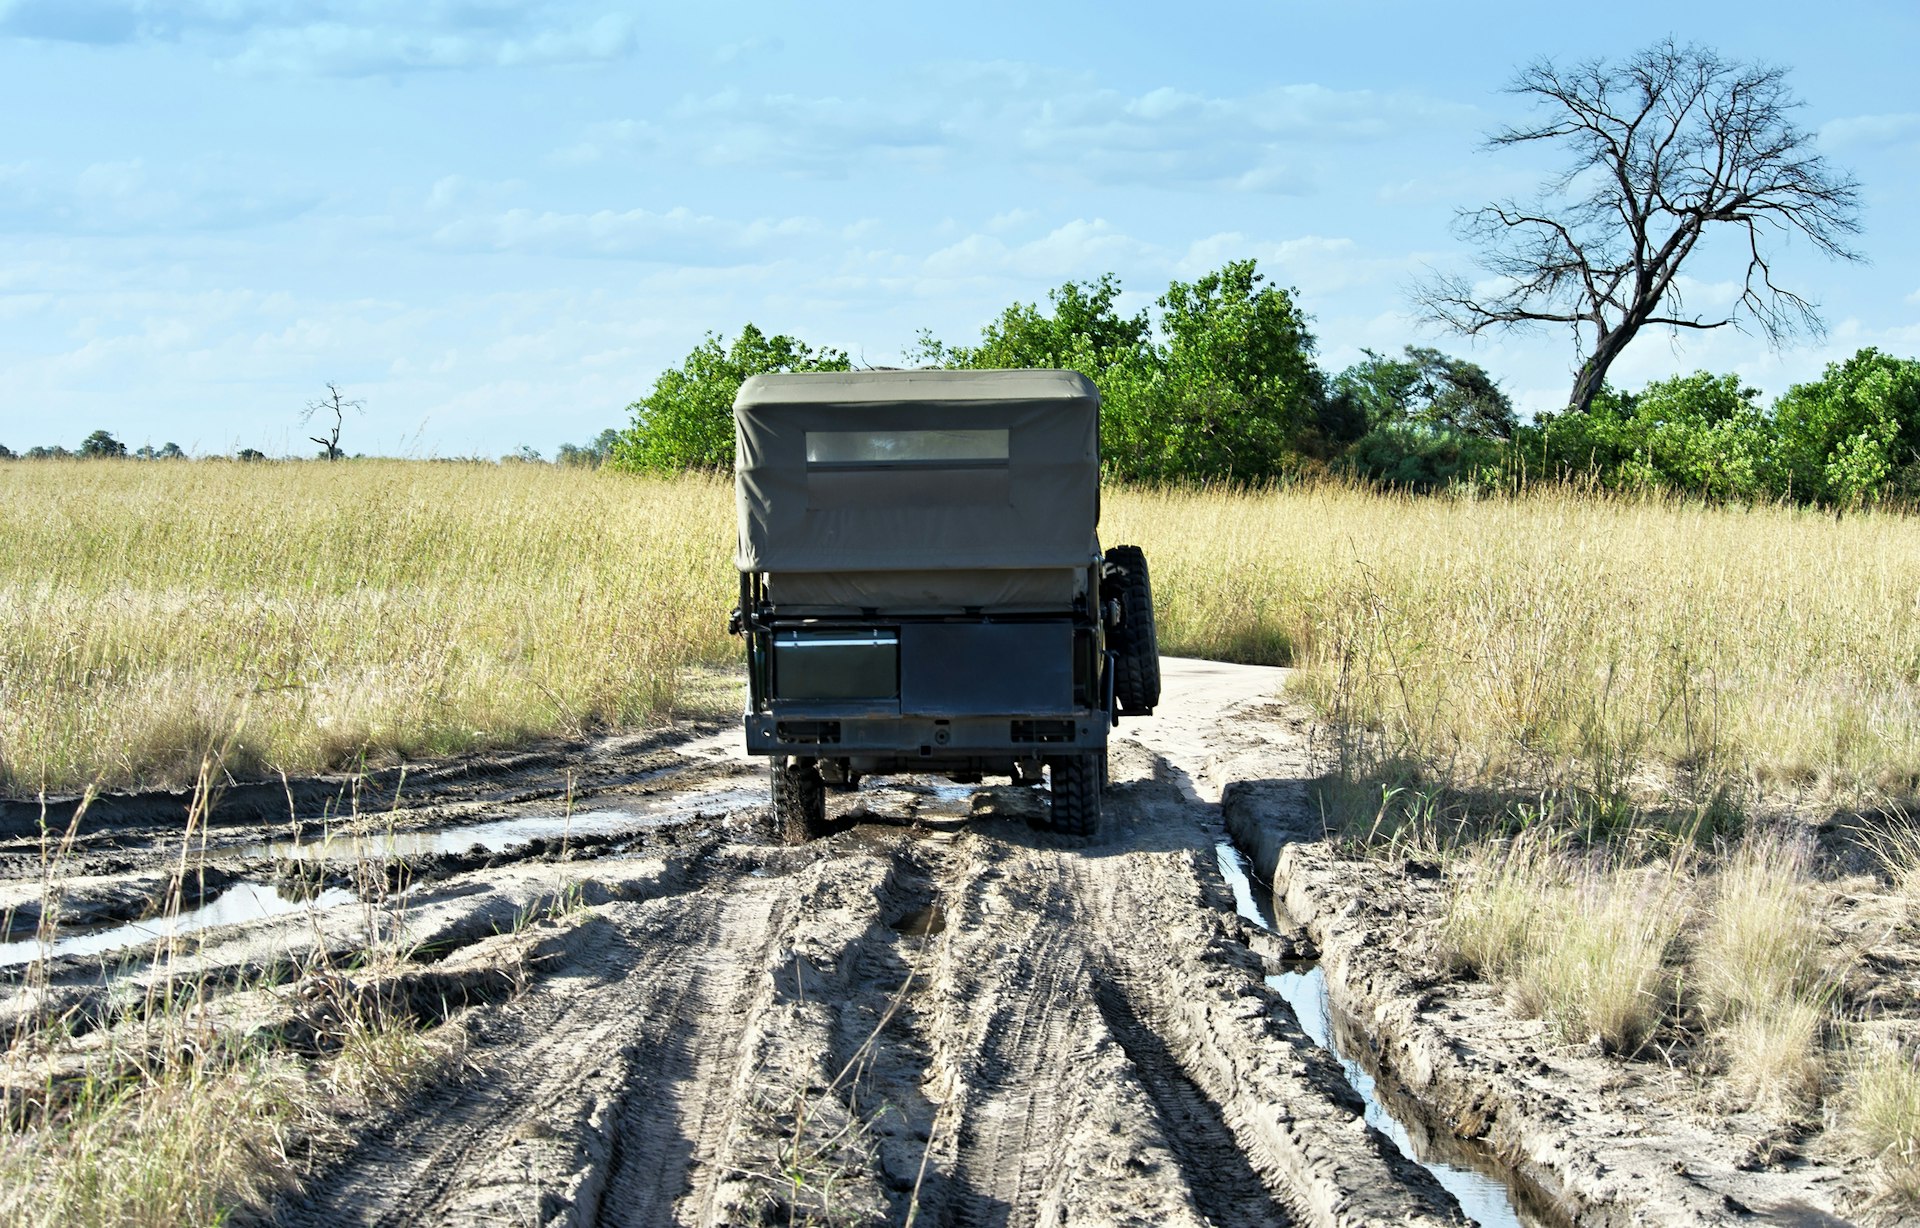 Rear view of a four wheel safari vehicle driving on a dirt road with tire tracks during  a game drive in the Selinda Concession at the end of the rainy season.